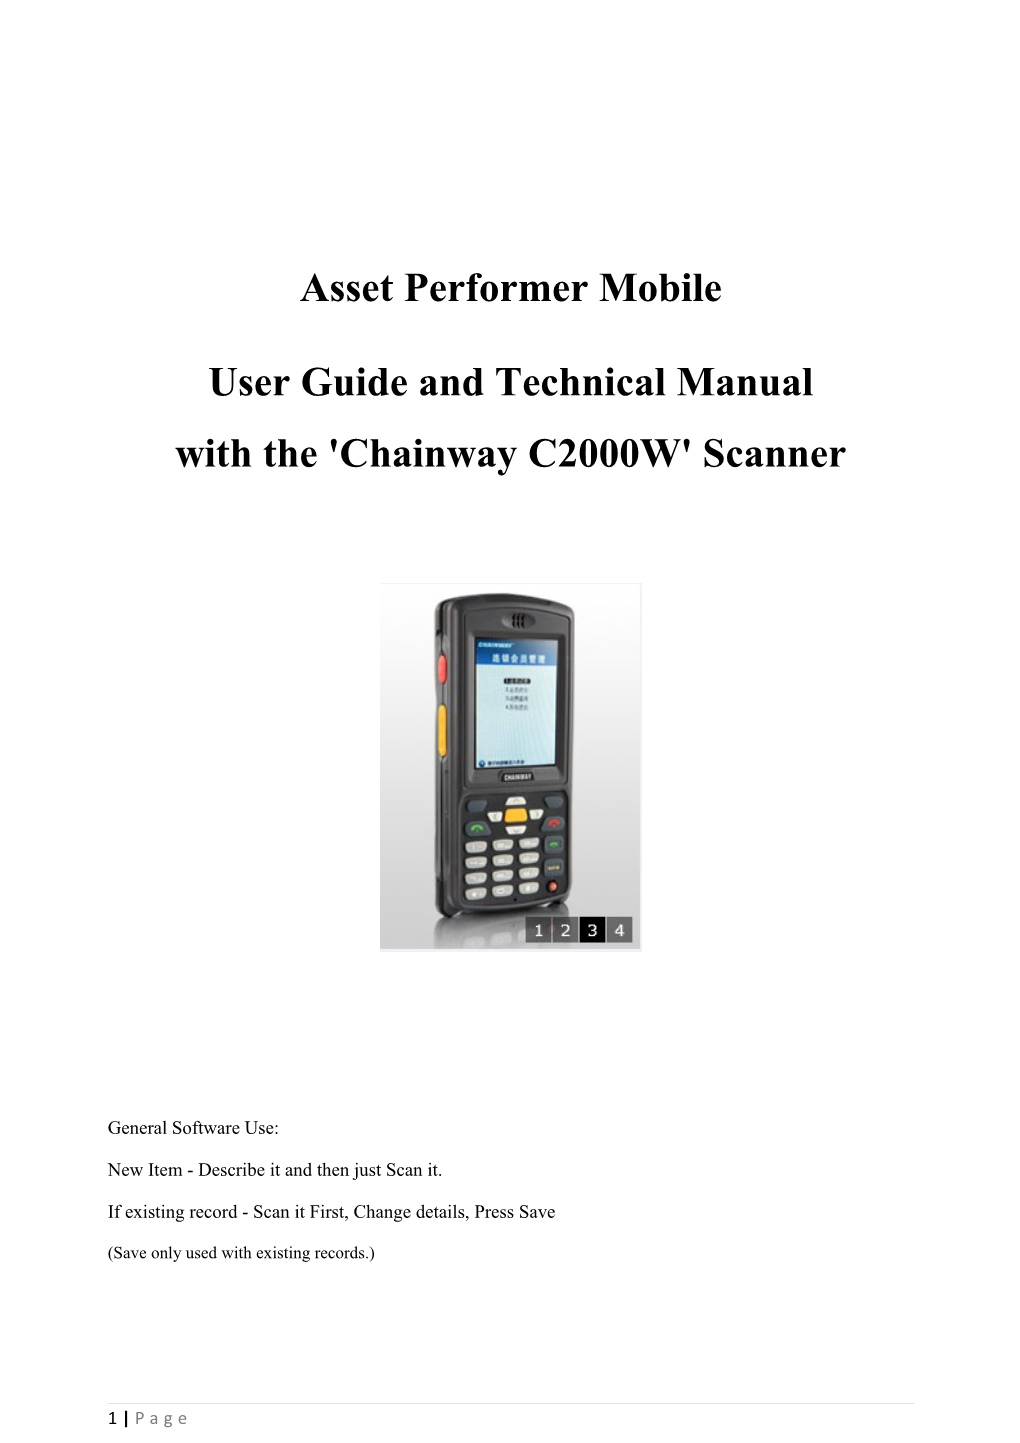 User Guide and Technical Manual